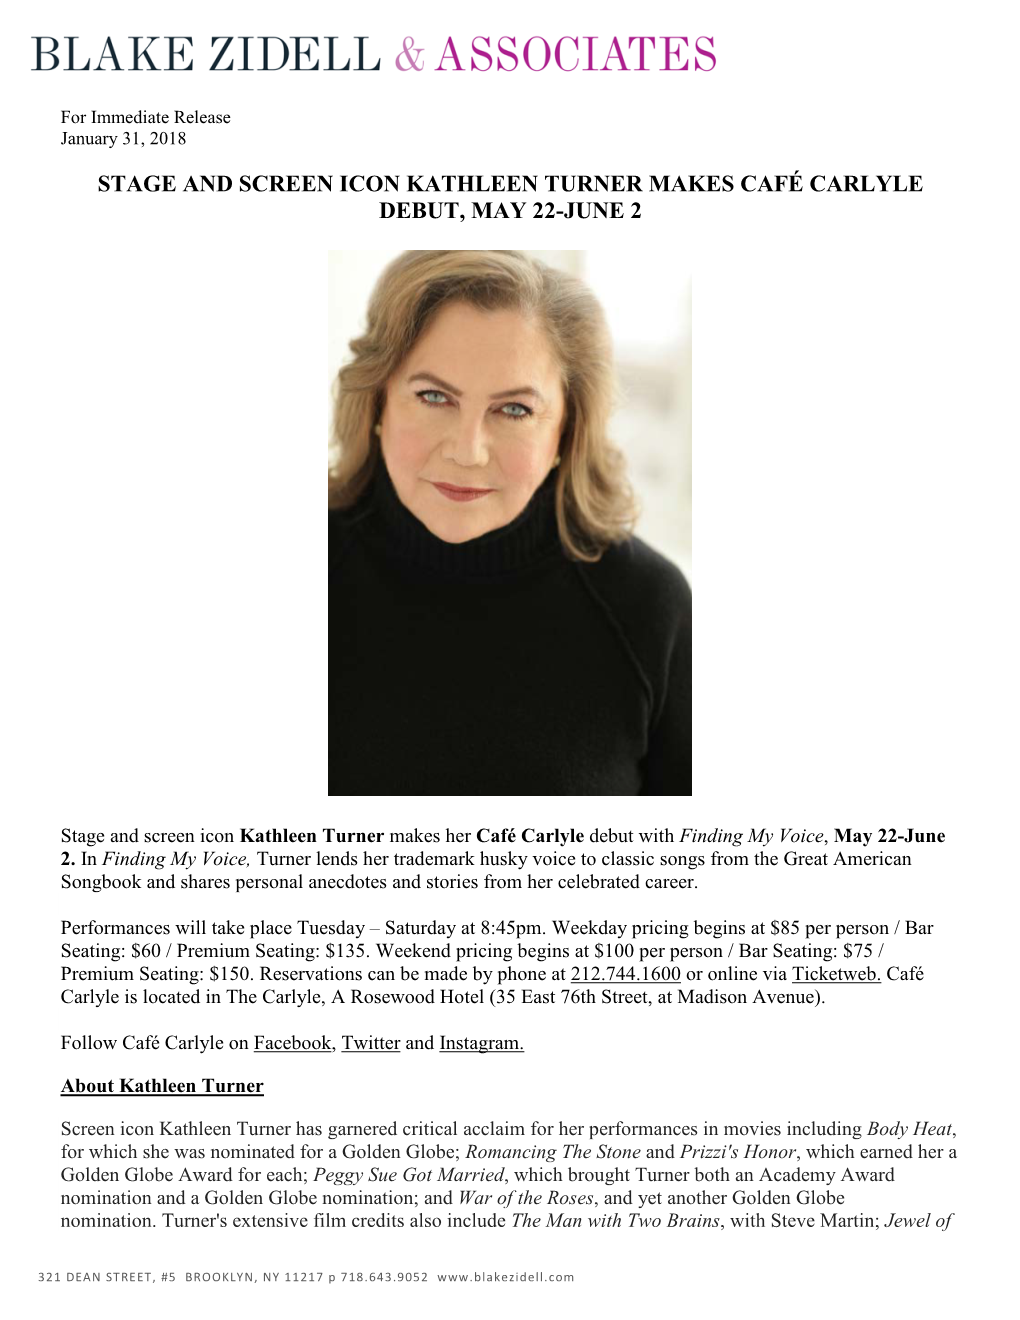 Stage and Screen Icon Kathleen Turner Makes Café Carlyle Debut, May 22-June 2